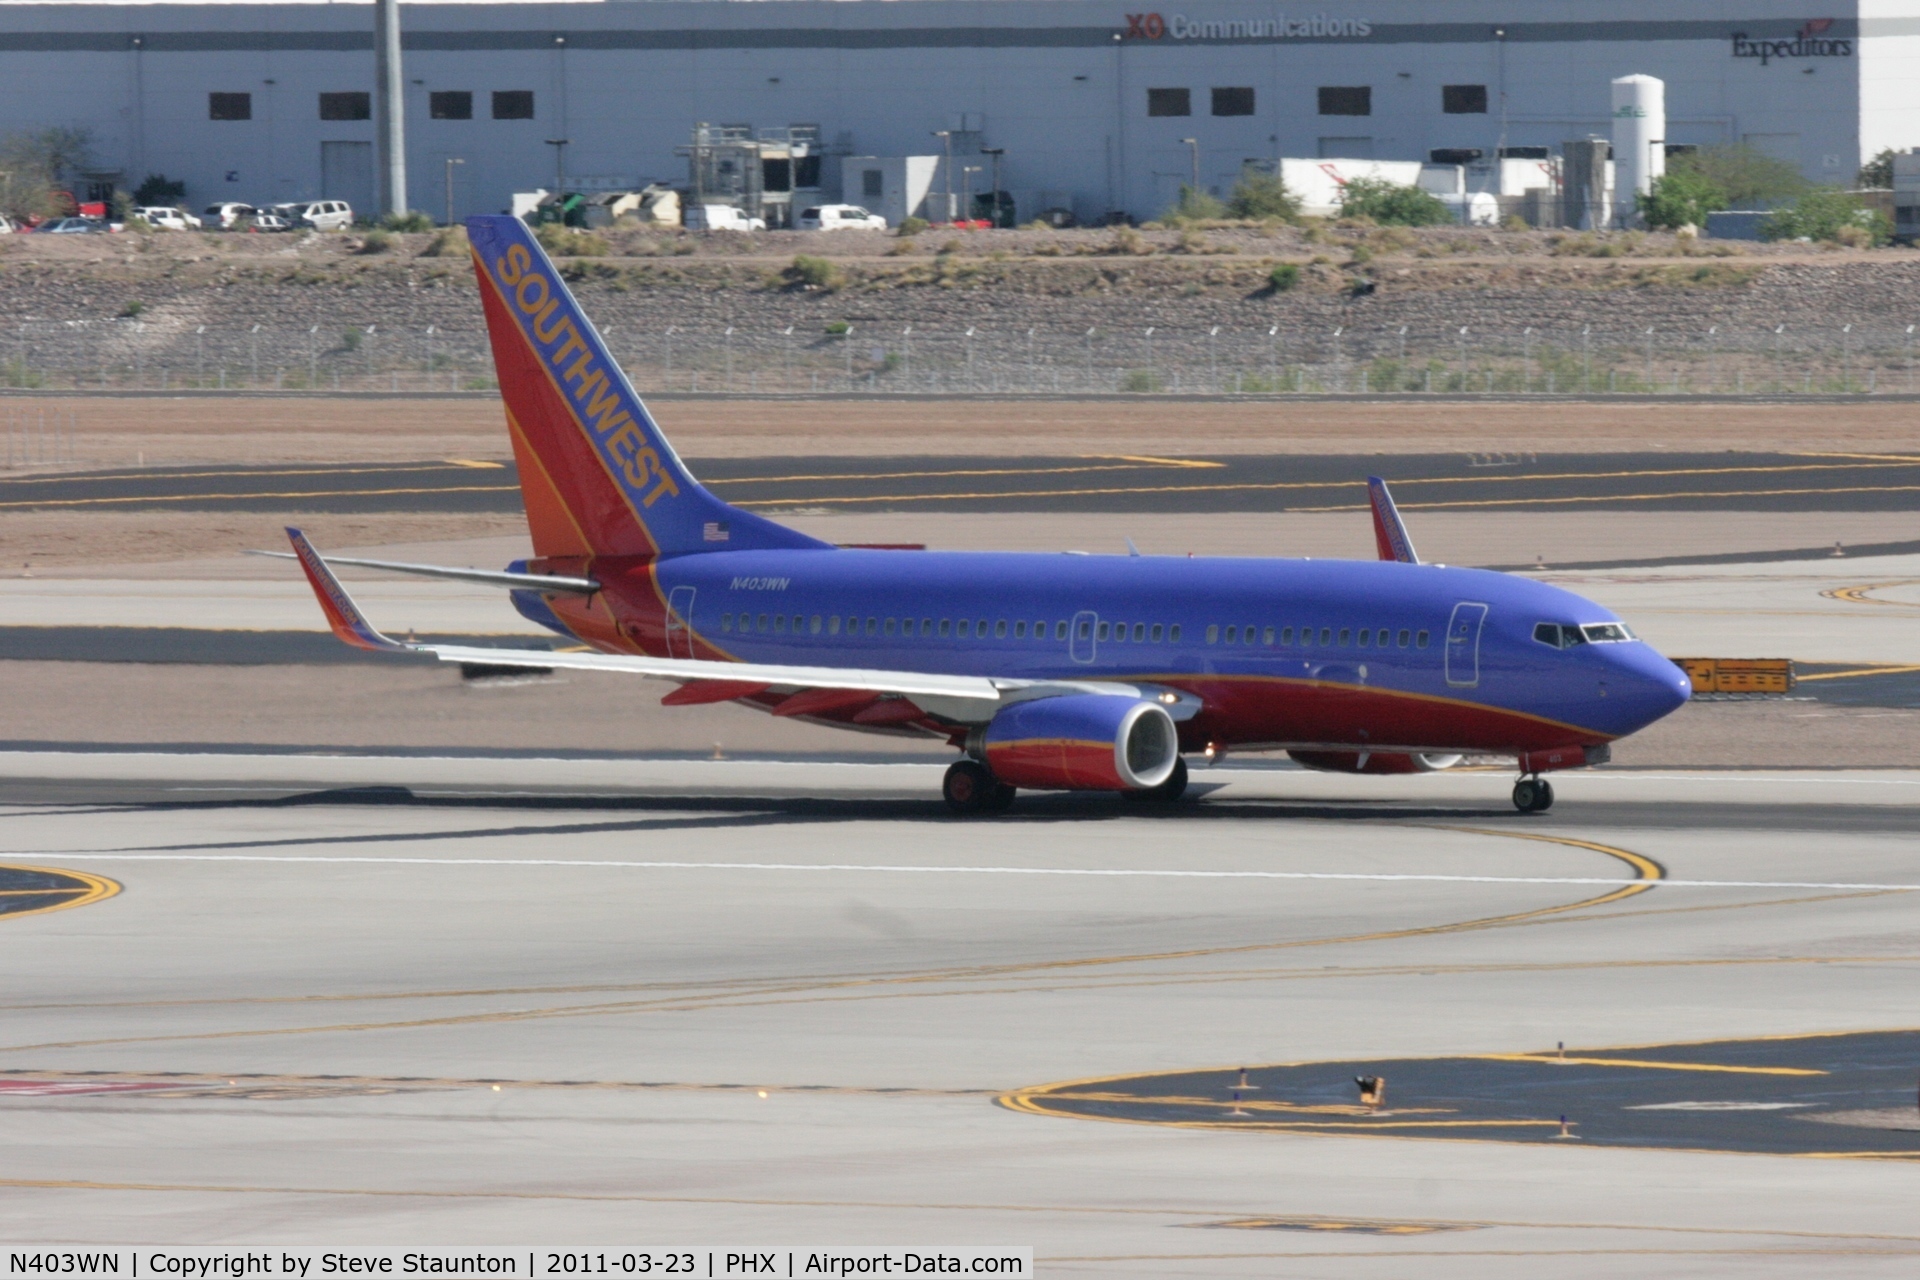 N403WN, 2001 Boeing 737-7H4 C/N 29815, Taken at Phoenix Sky Harbor Airport, in March 2011 whilst on an Aeroprint Aviation tour